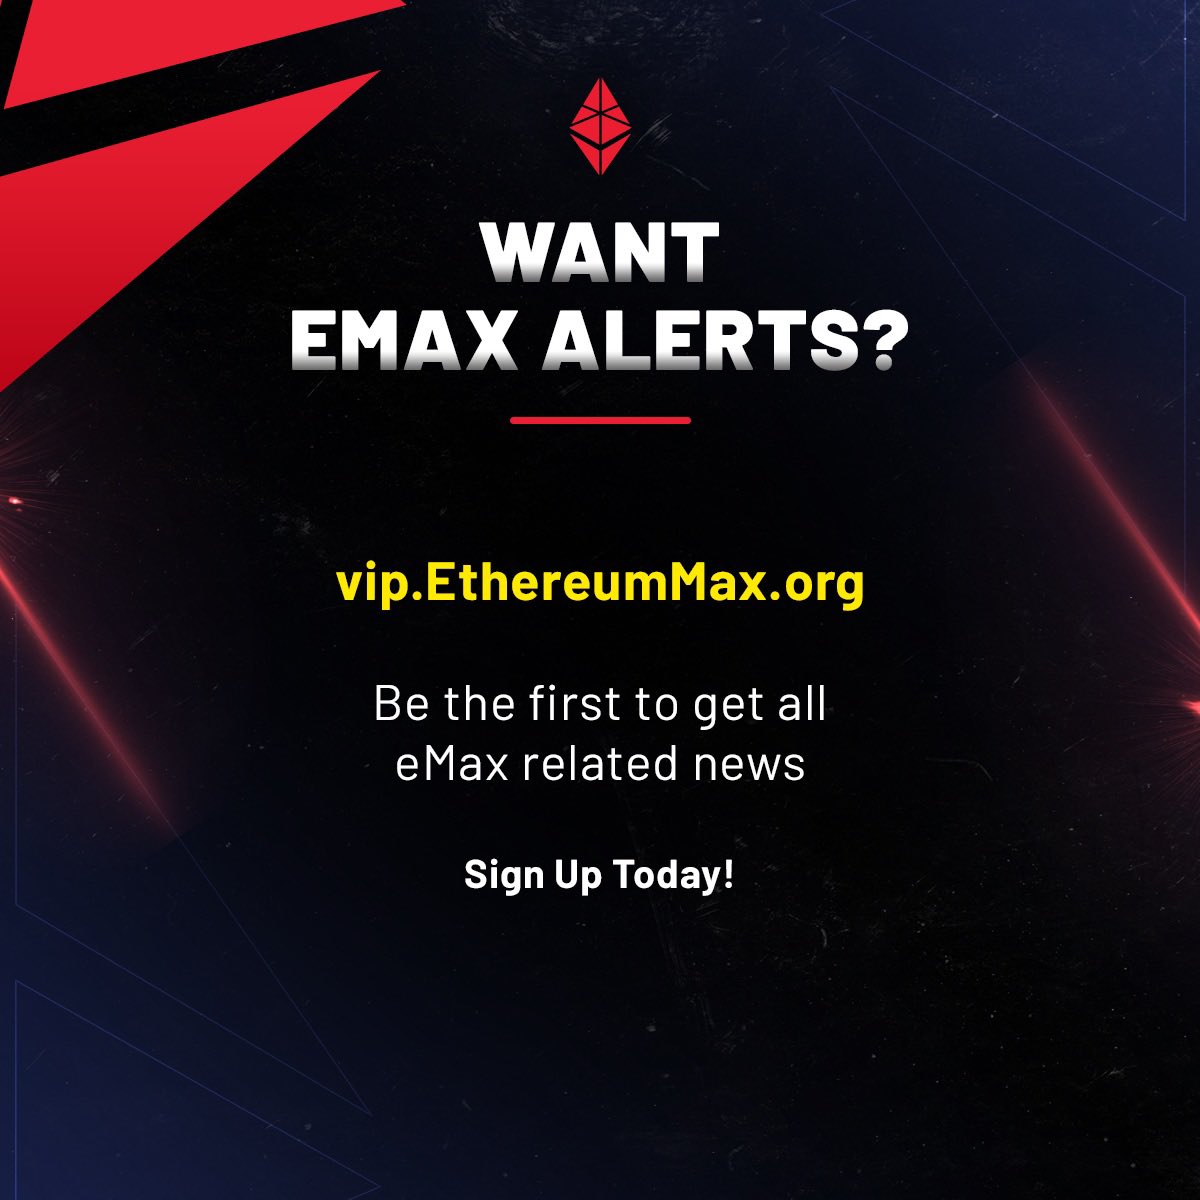 Have you signed up to receive our weekly newsletter yet? If not, what are you waiting for? Click the link and sign up now! vip.ethereummax.org/alerts 

#cryptocurrency #Crypto #EMAX